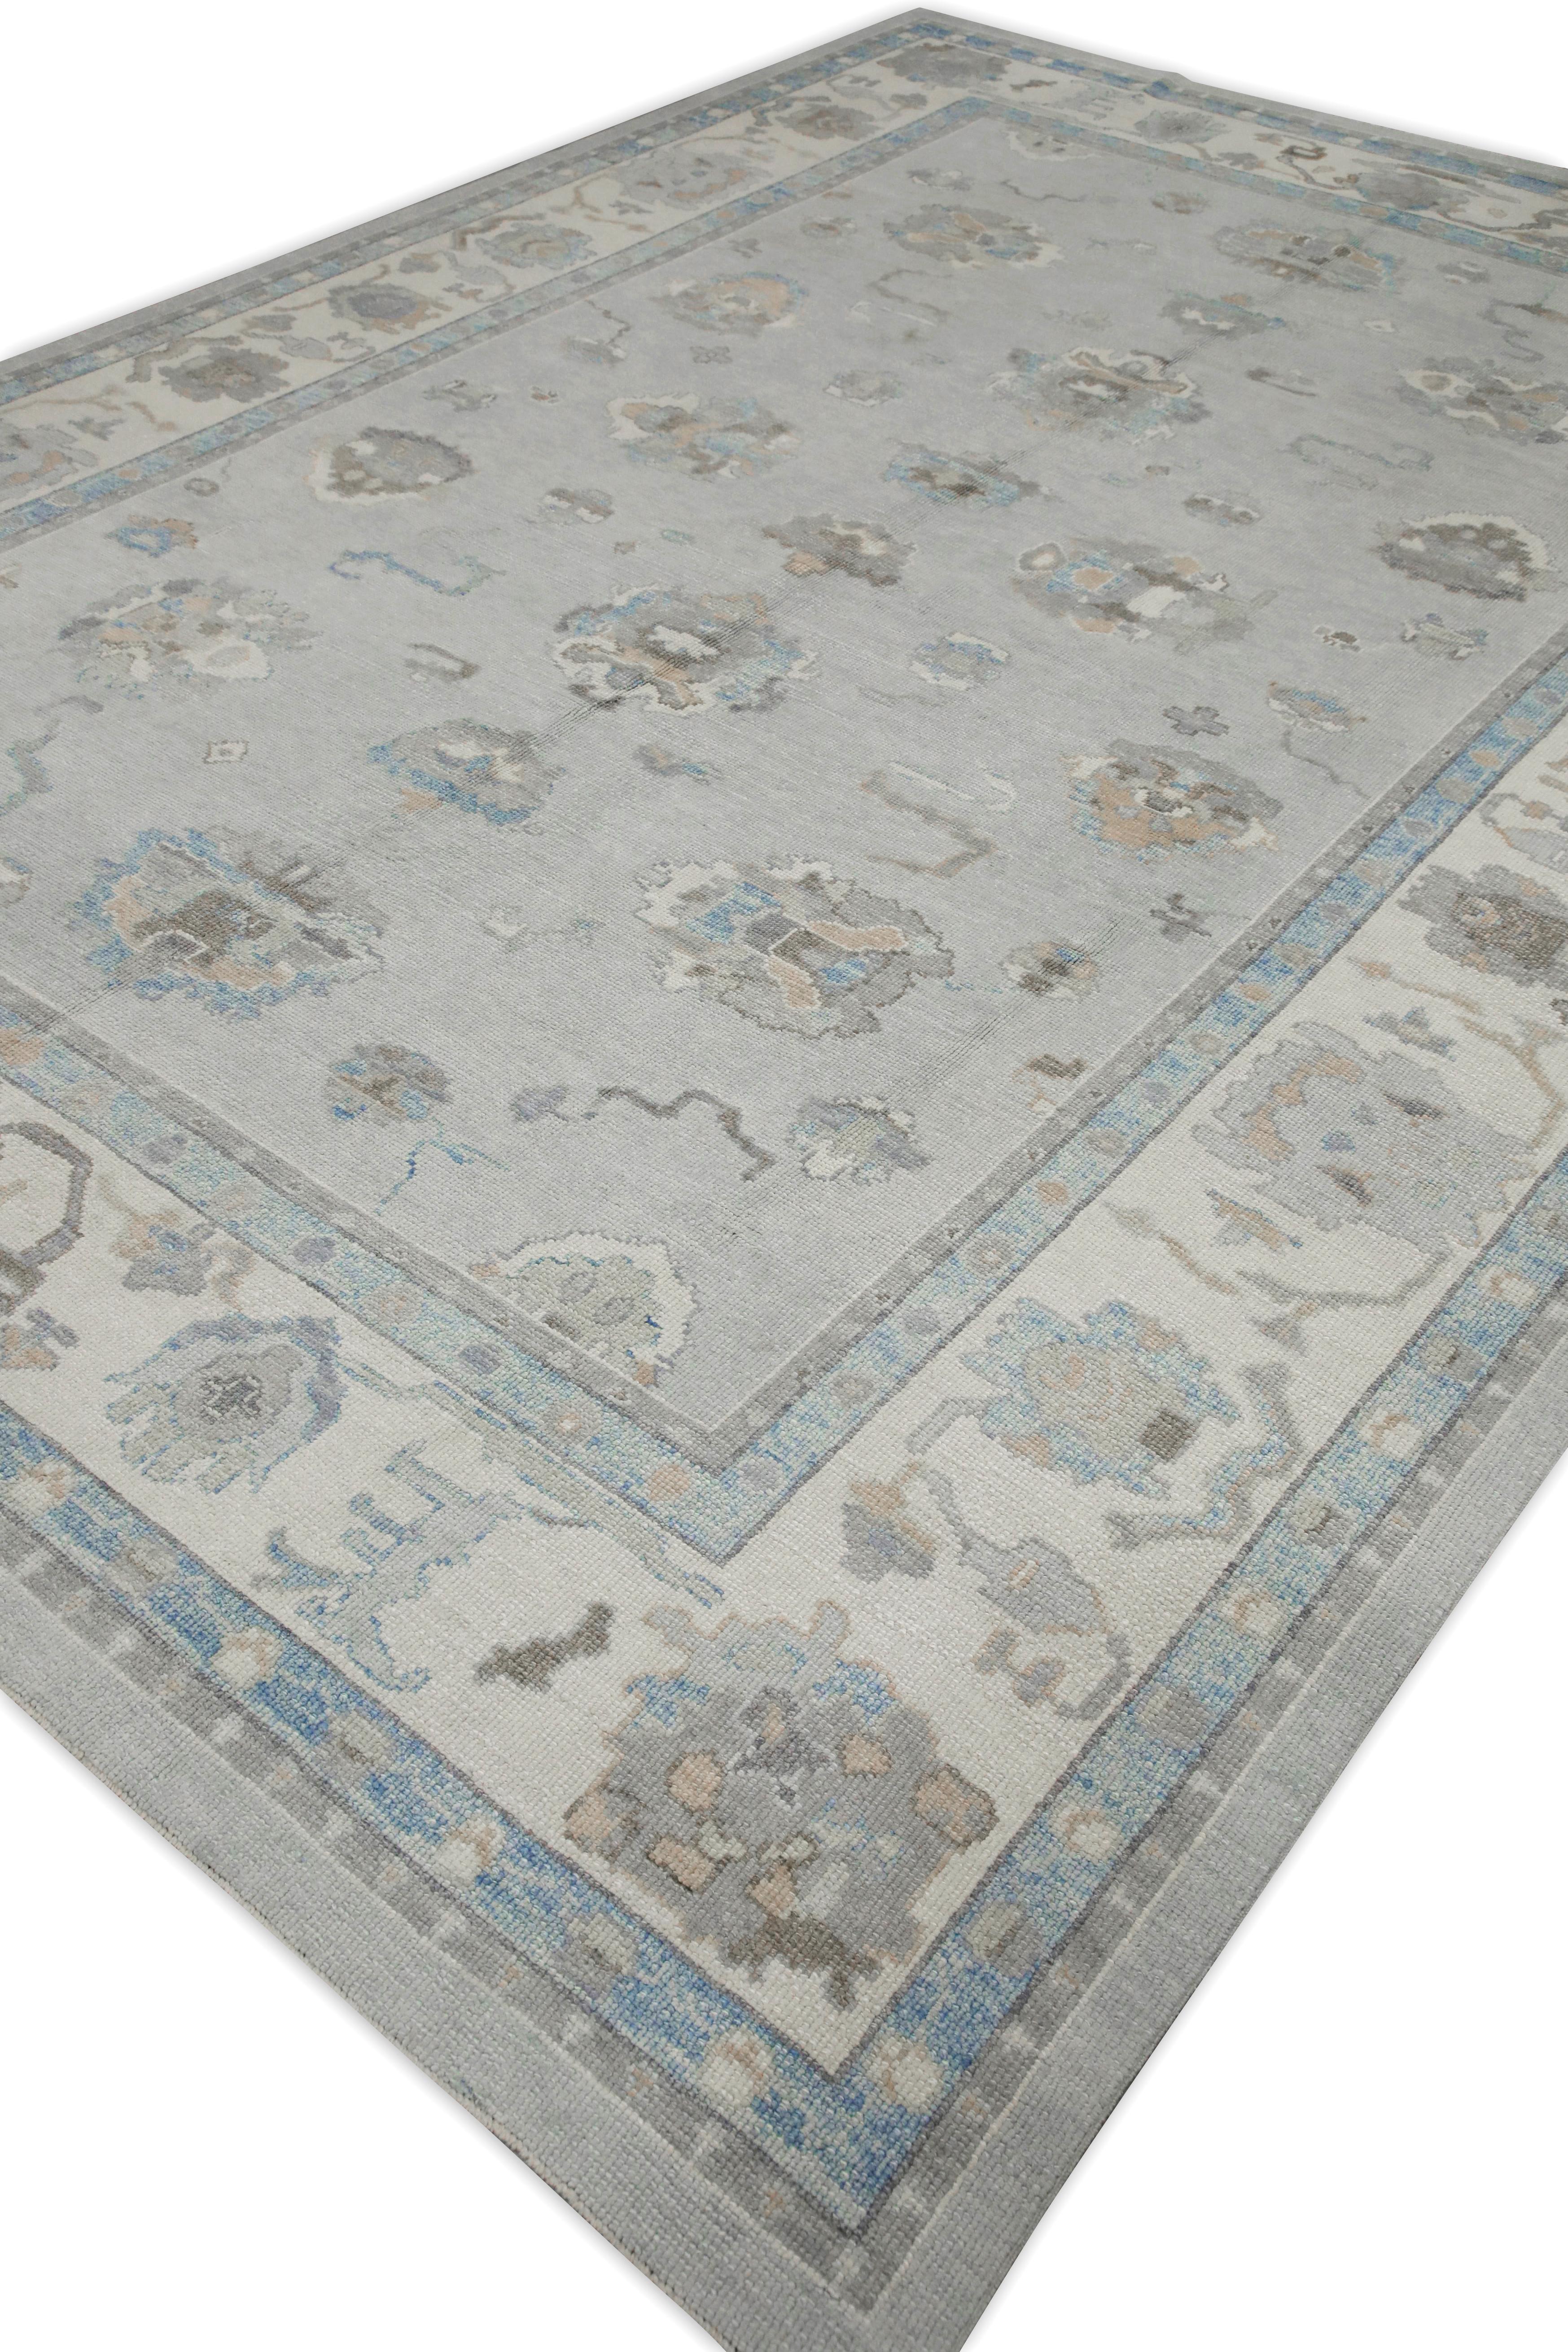 Contemporary Blue Floral Design Handwoven Wool Turkish Oushak Rug 9'10